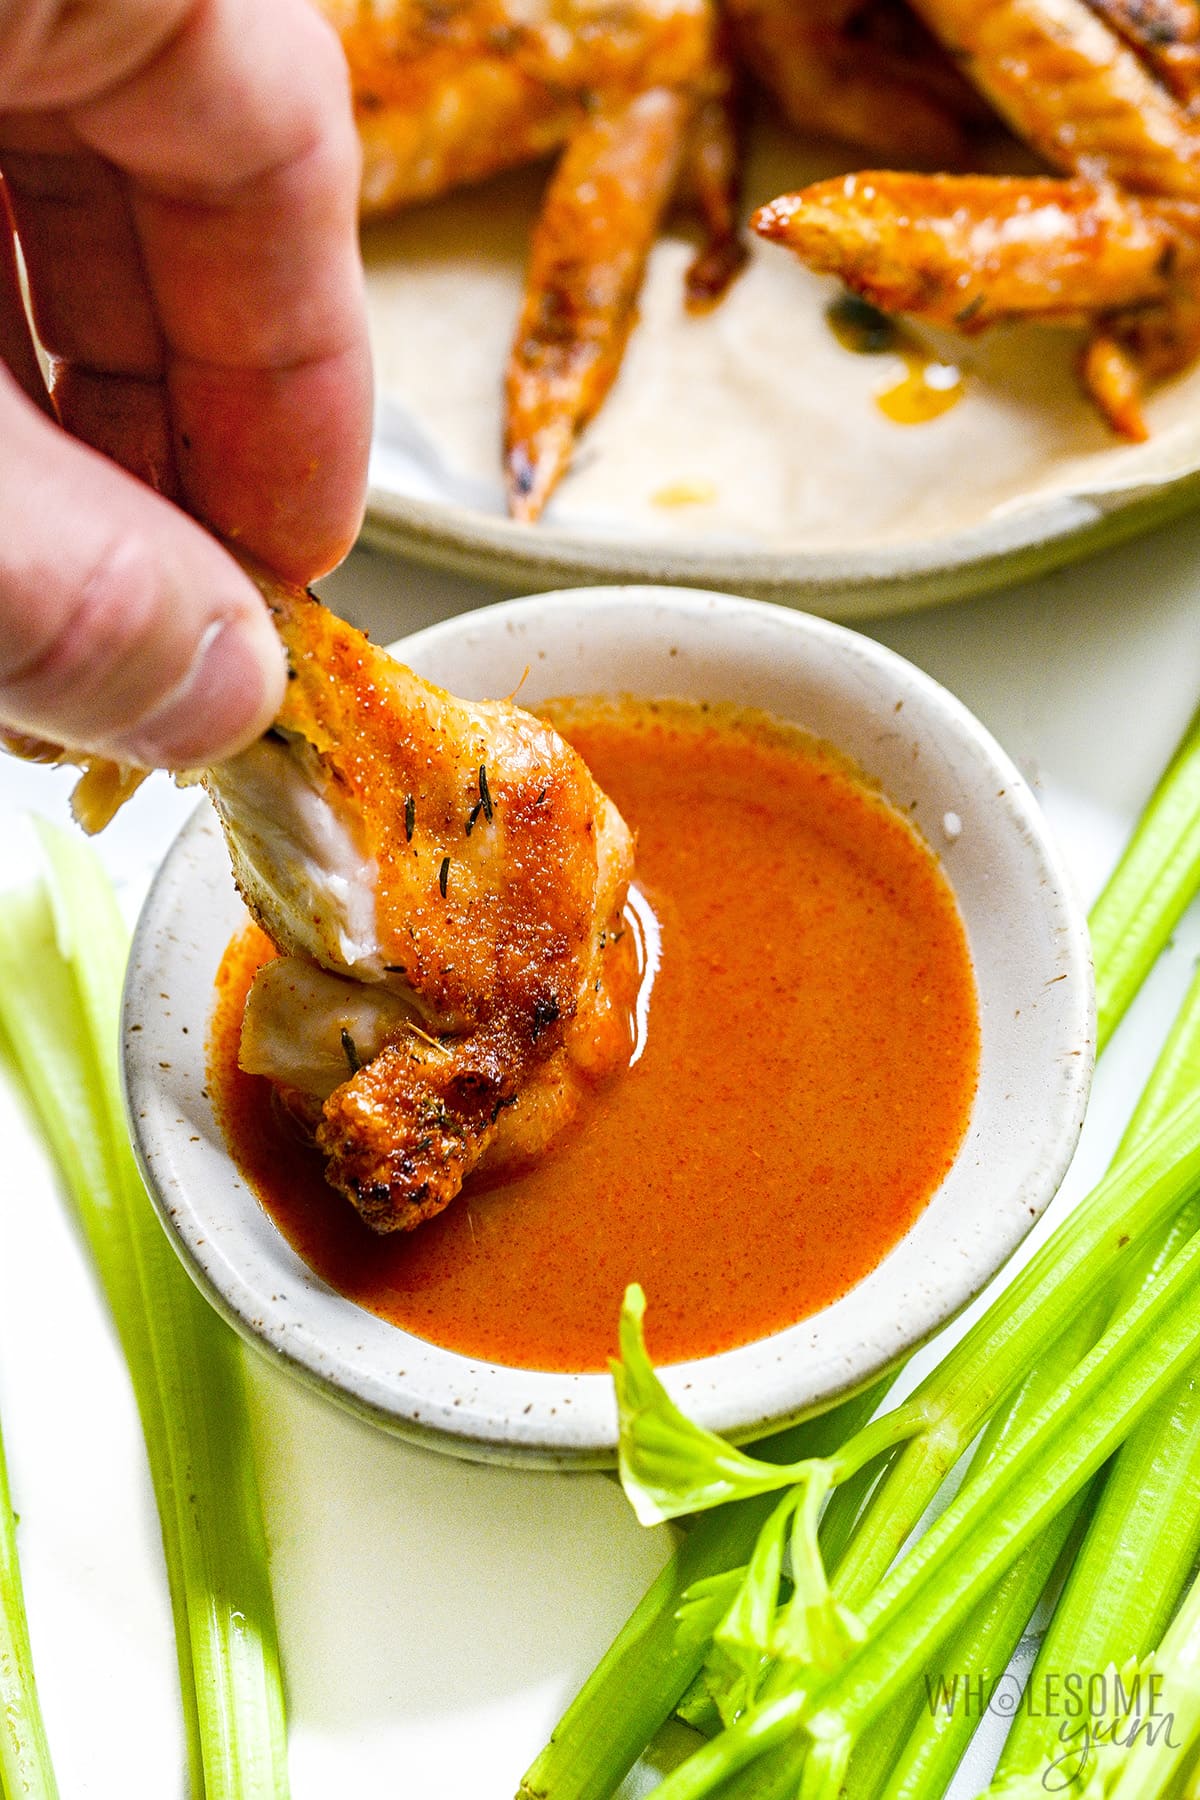 Whole chicken wings dipped in sauce.